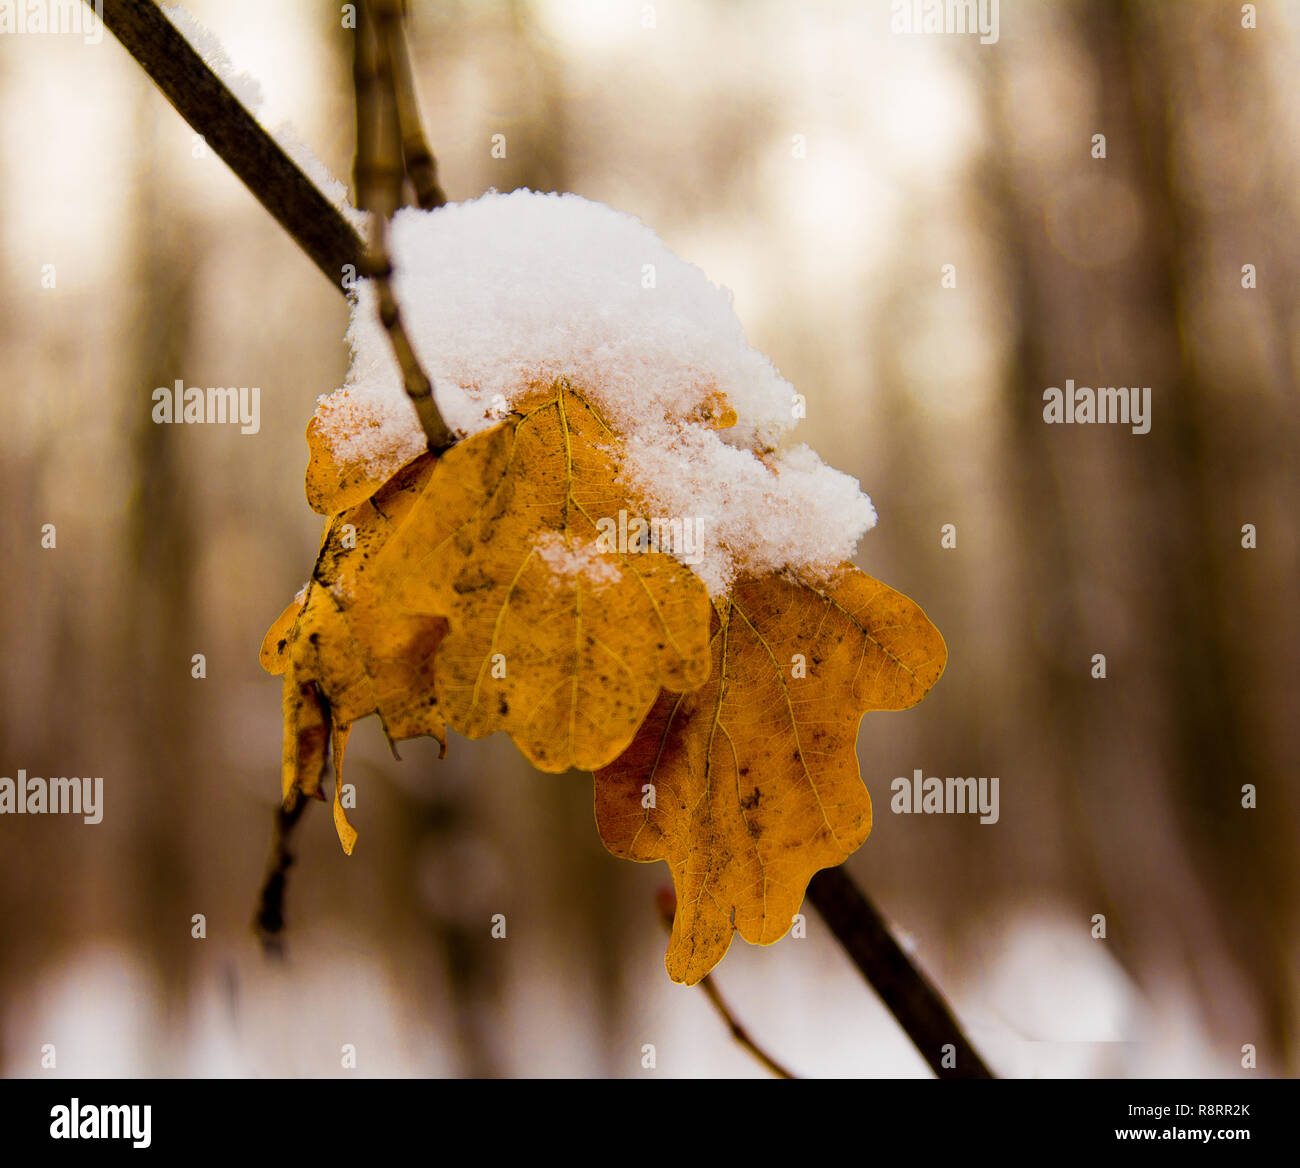 First snow on oak leaves Stock Photo